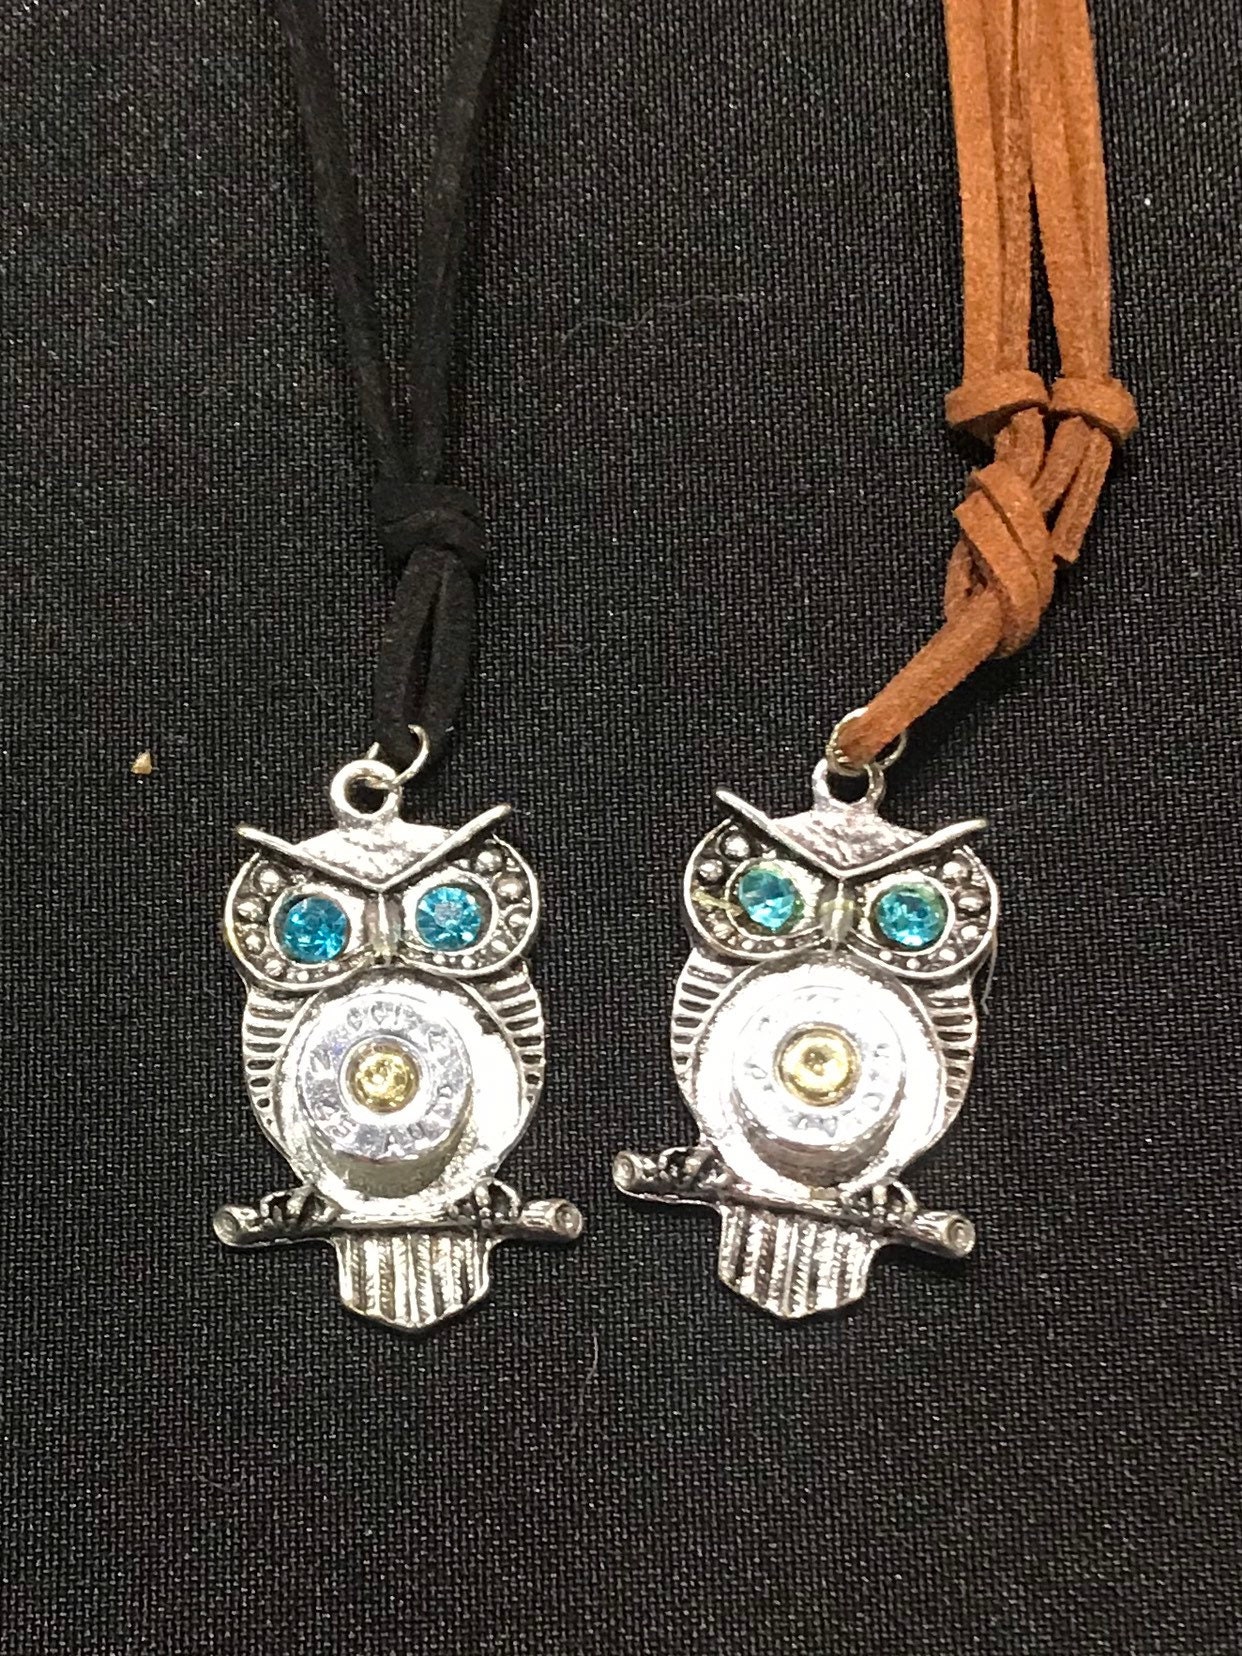 Metal pendant owl H 45 mm B 26 mm rhinestones turquoise glass stone turquoise fine link necklace old silver gift owl lover Valentine/'s Day